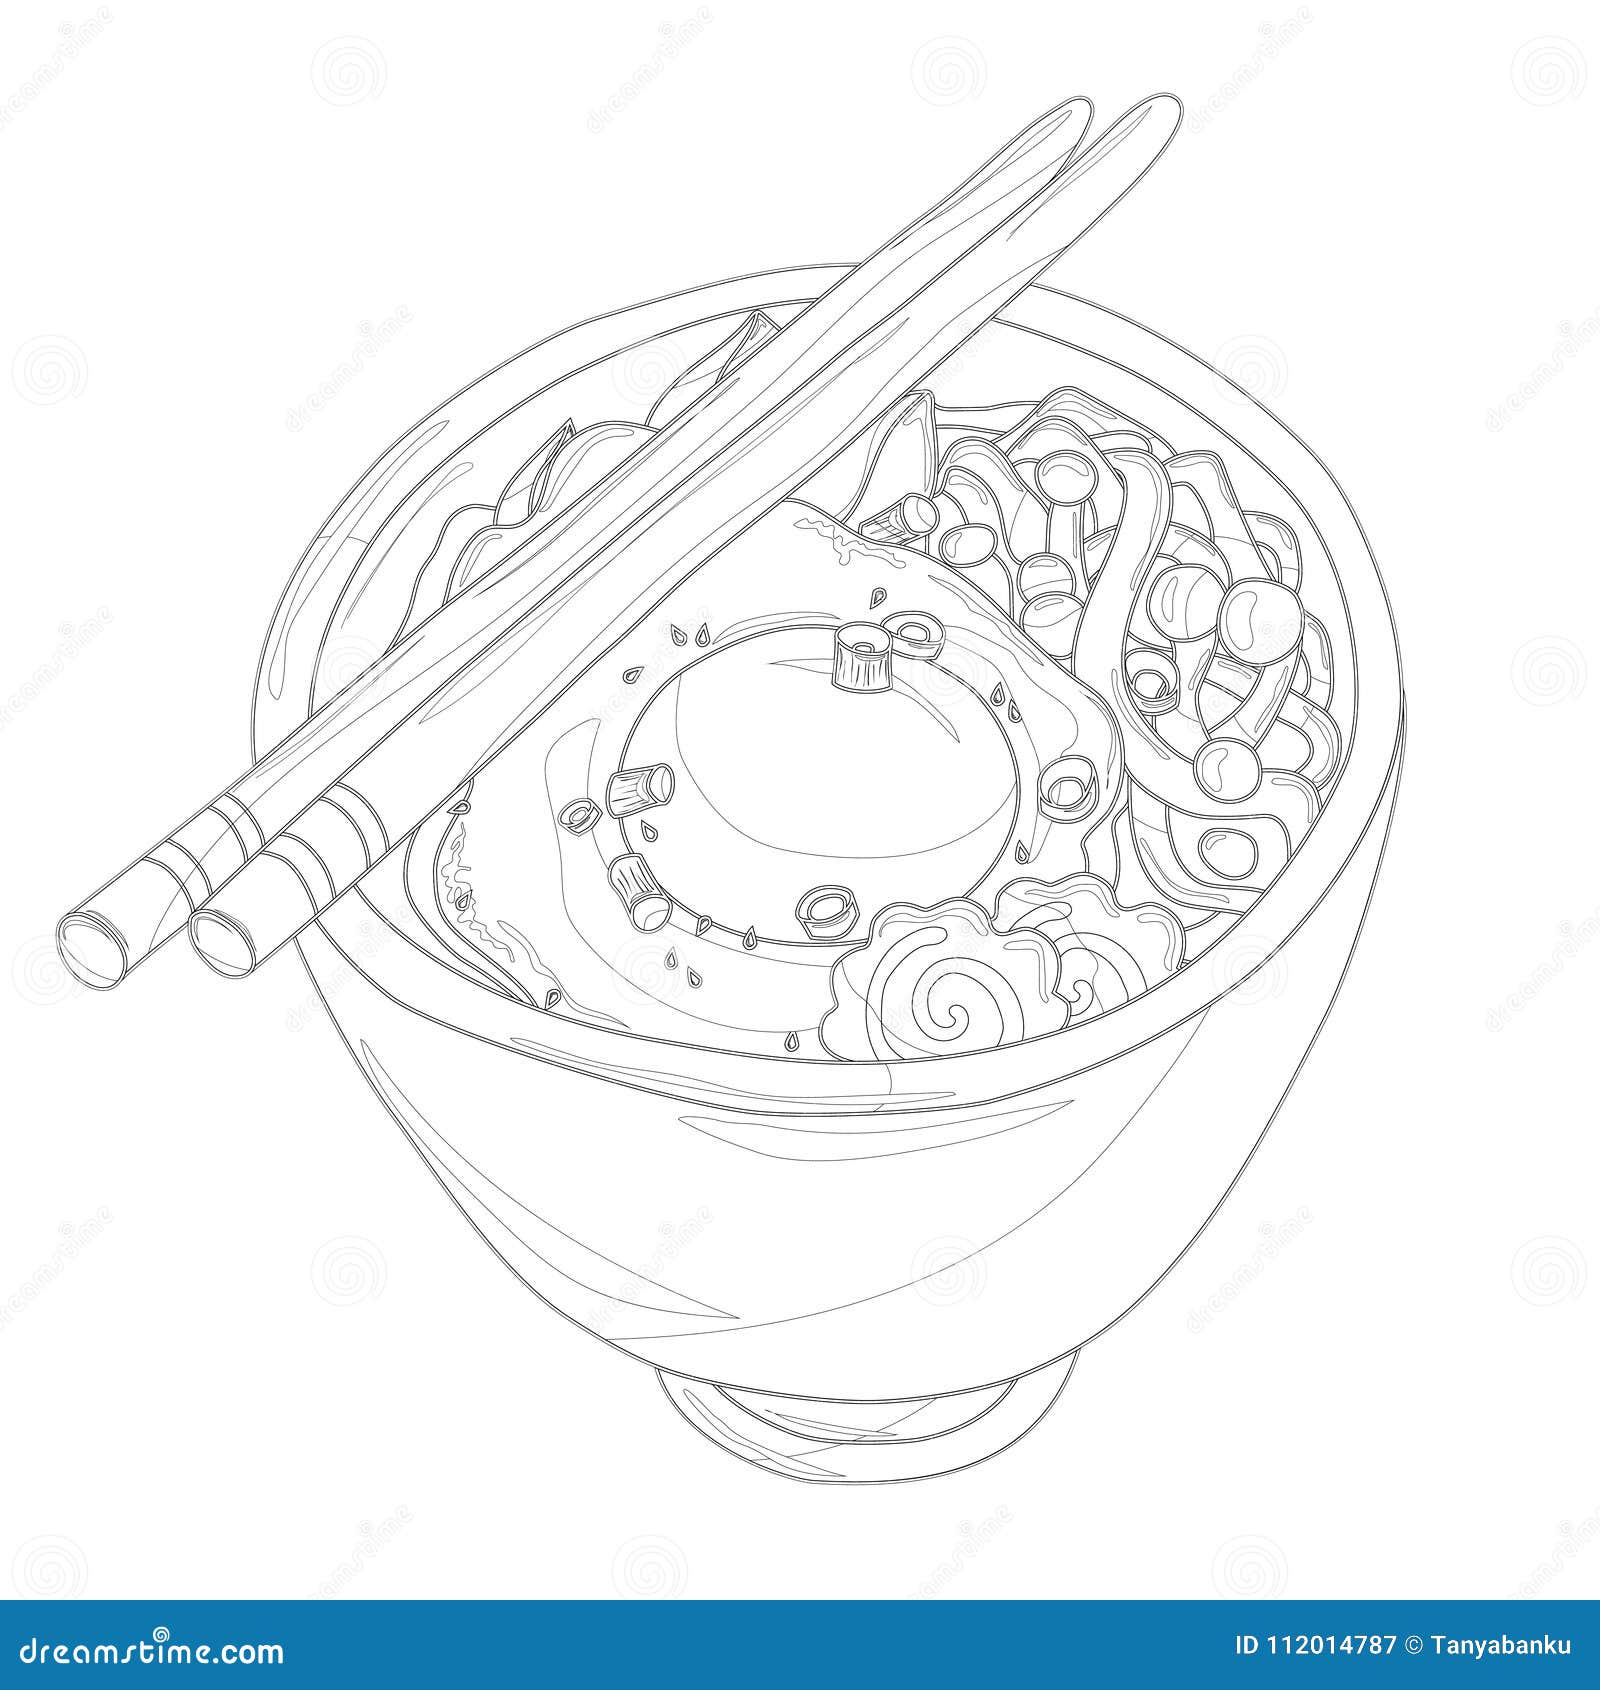 Pasta Coloring Stock Illustrations – 20 Pasta Coloring Stock ...